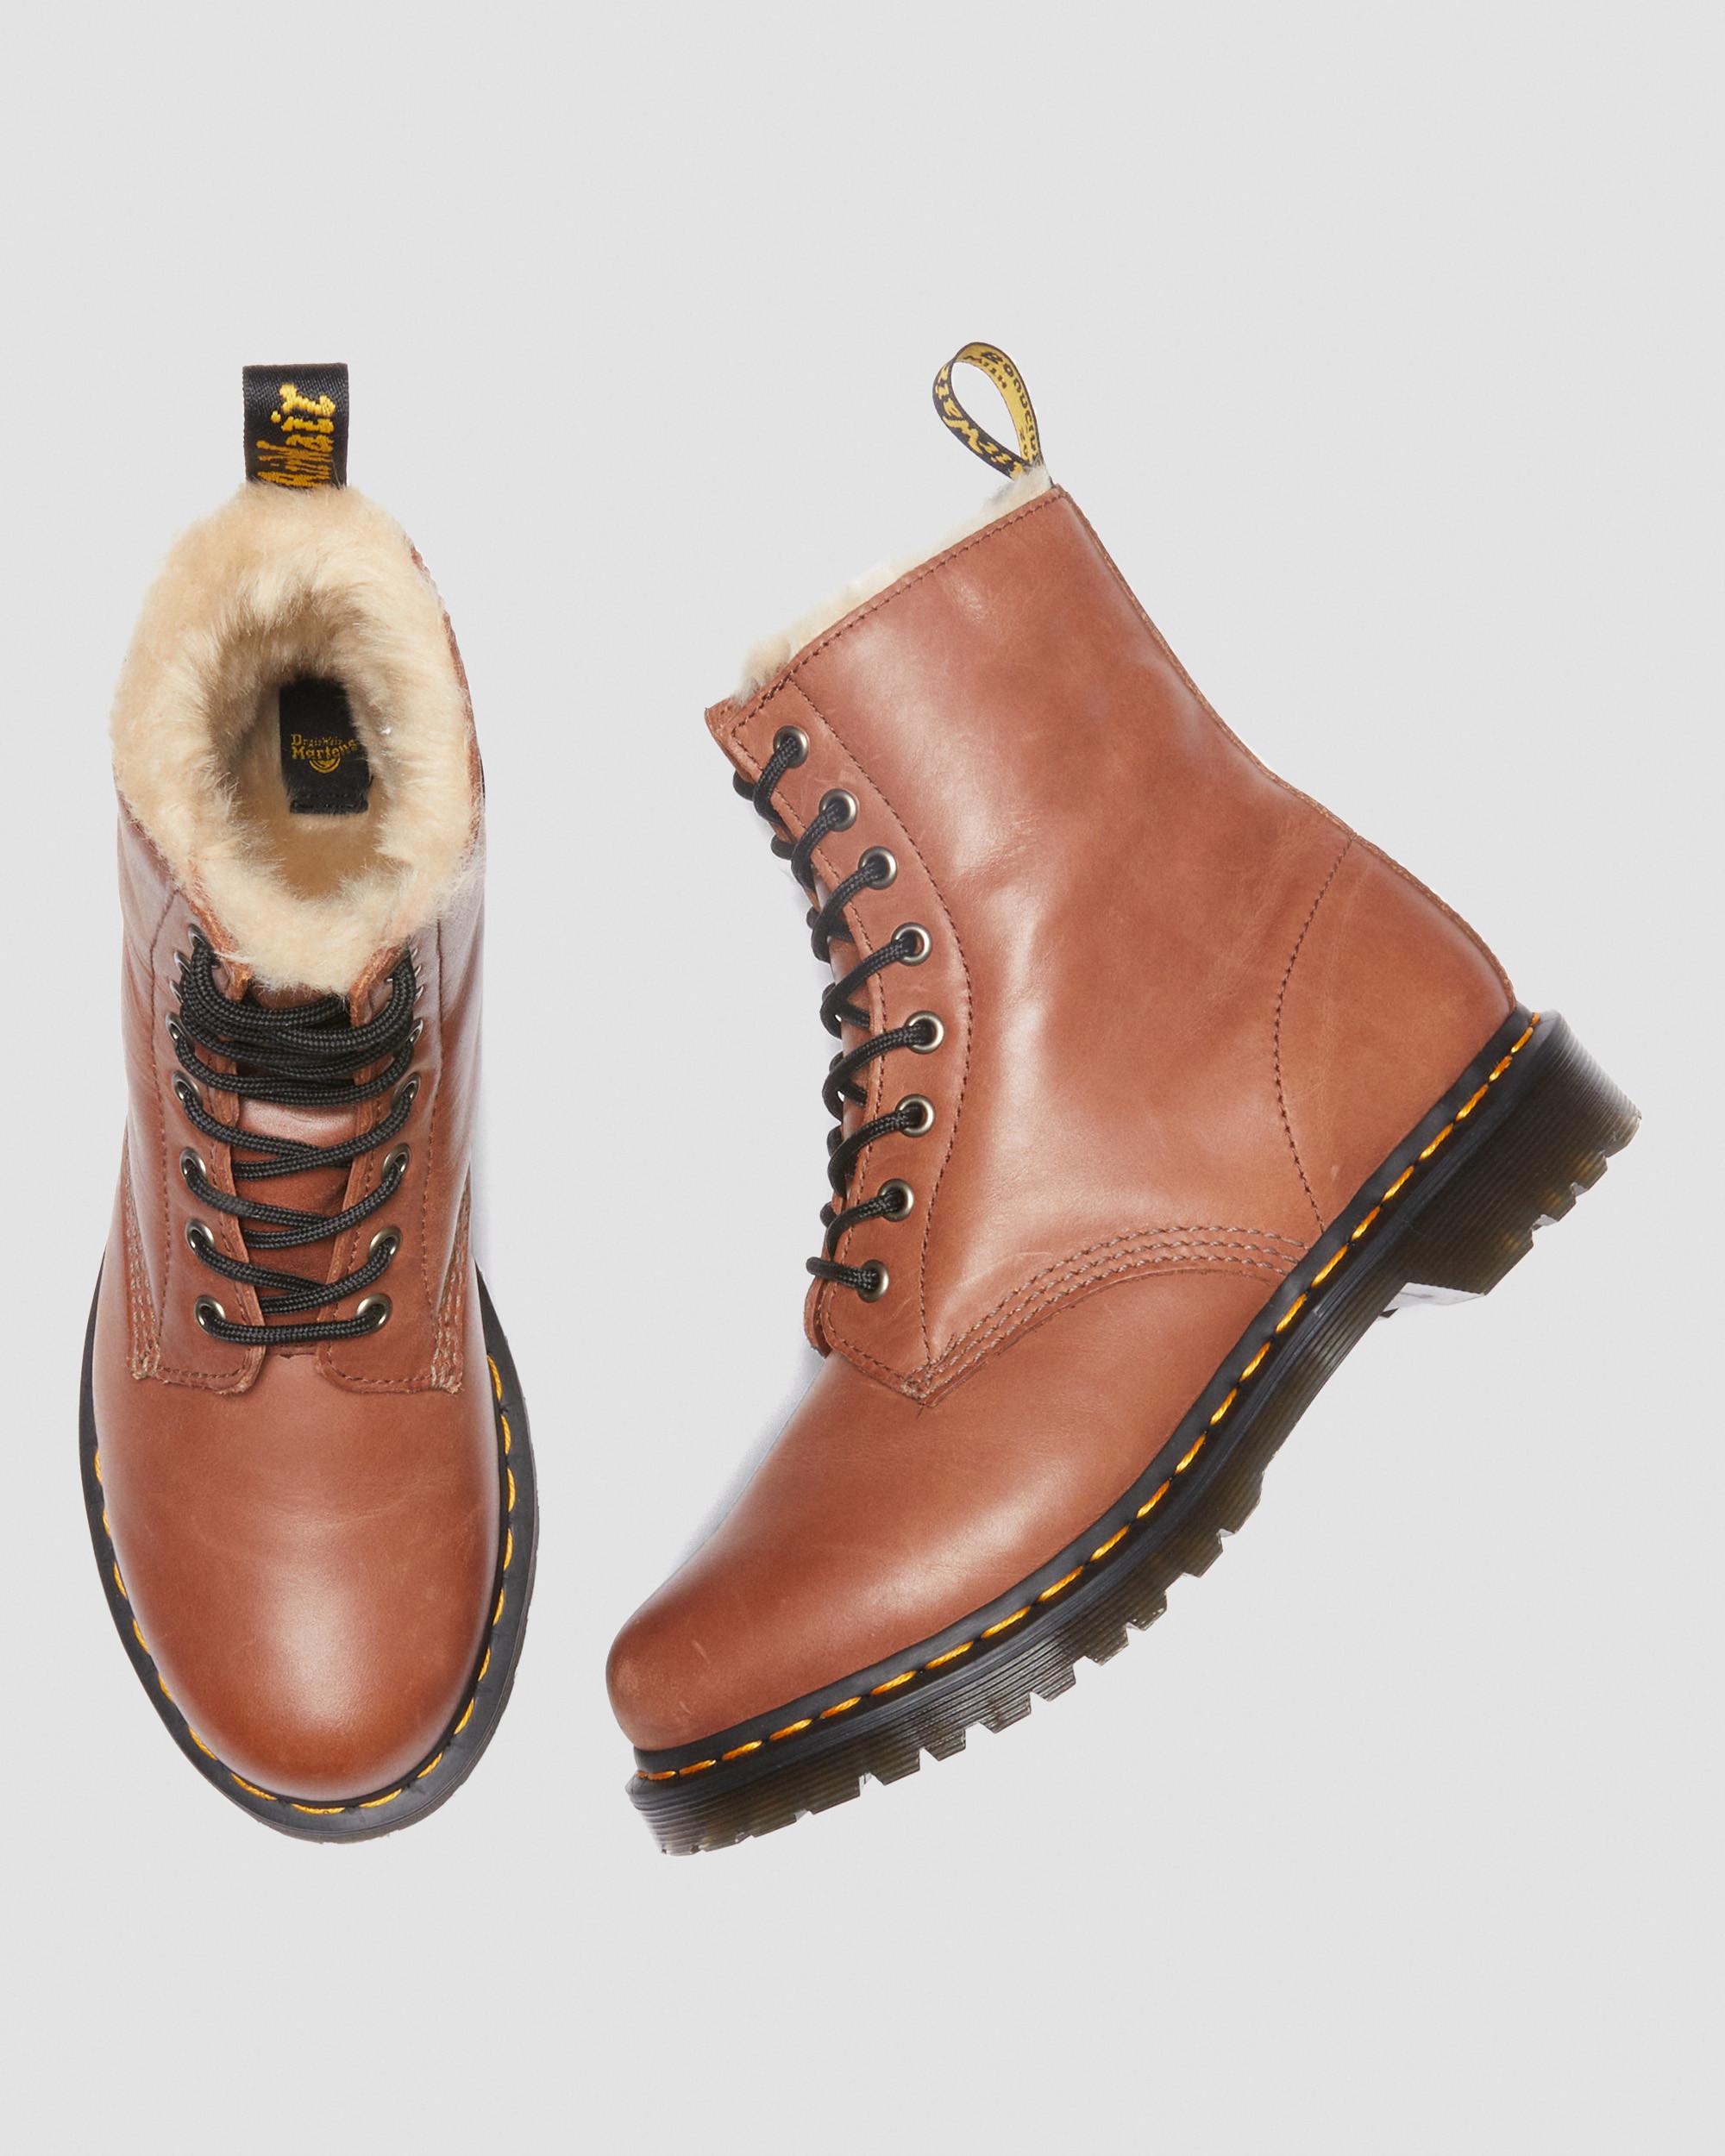 DR MARTENS 1460 Serena Women's Faux Fur-Lined Leather Boots